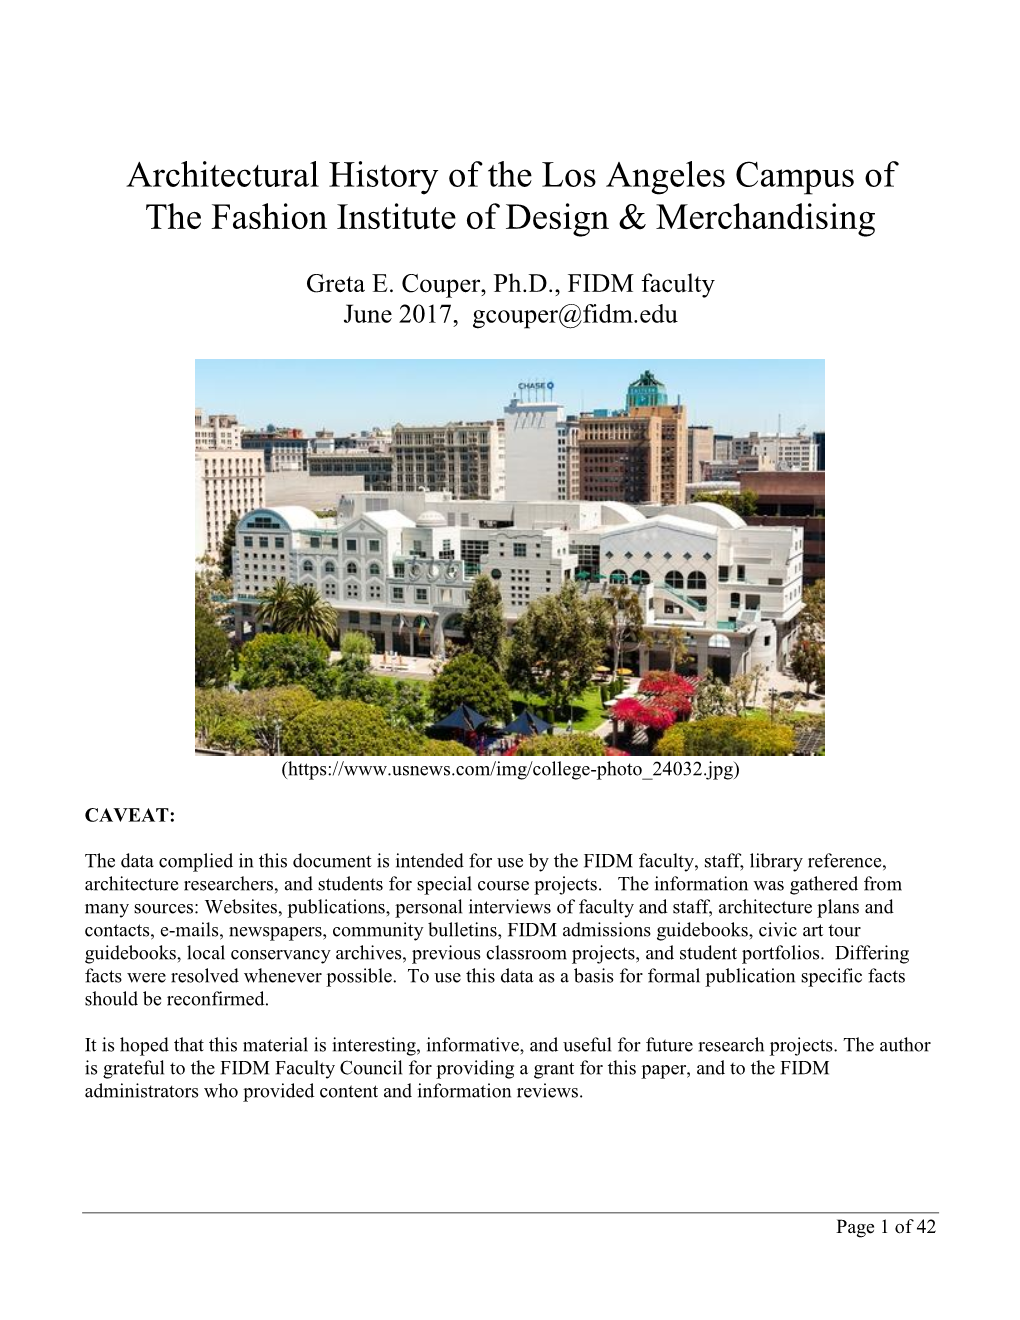 Architectural History of the Los Angeles Campus of the Fashion Institute of Design & Merchandising